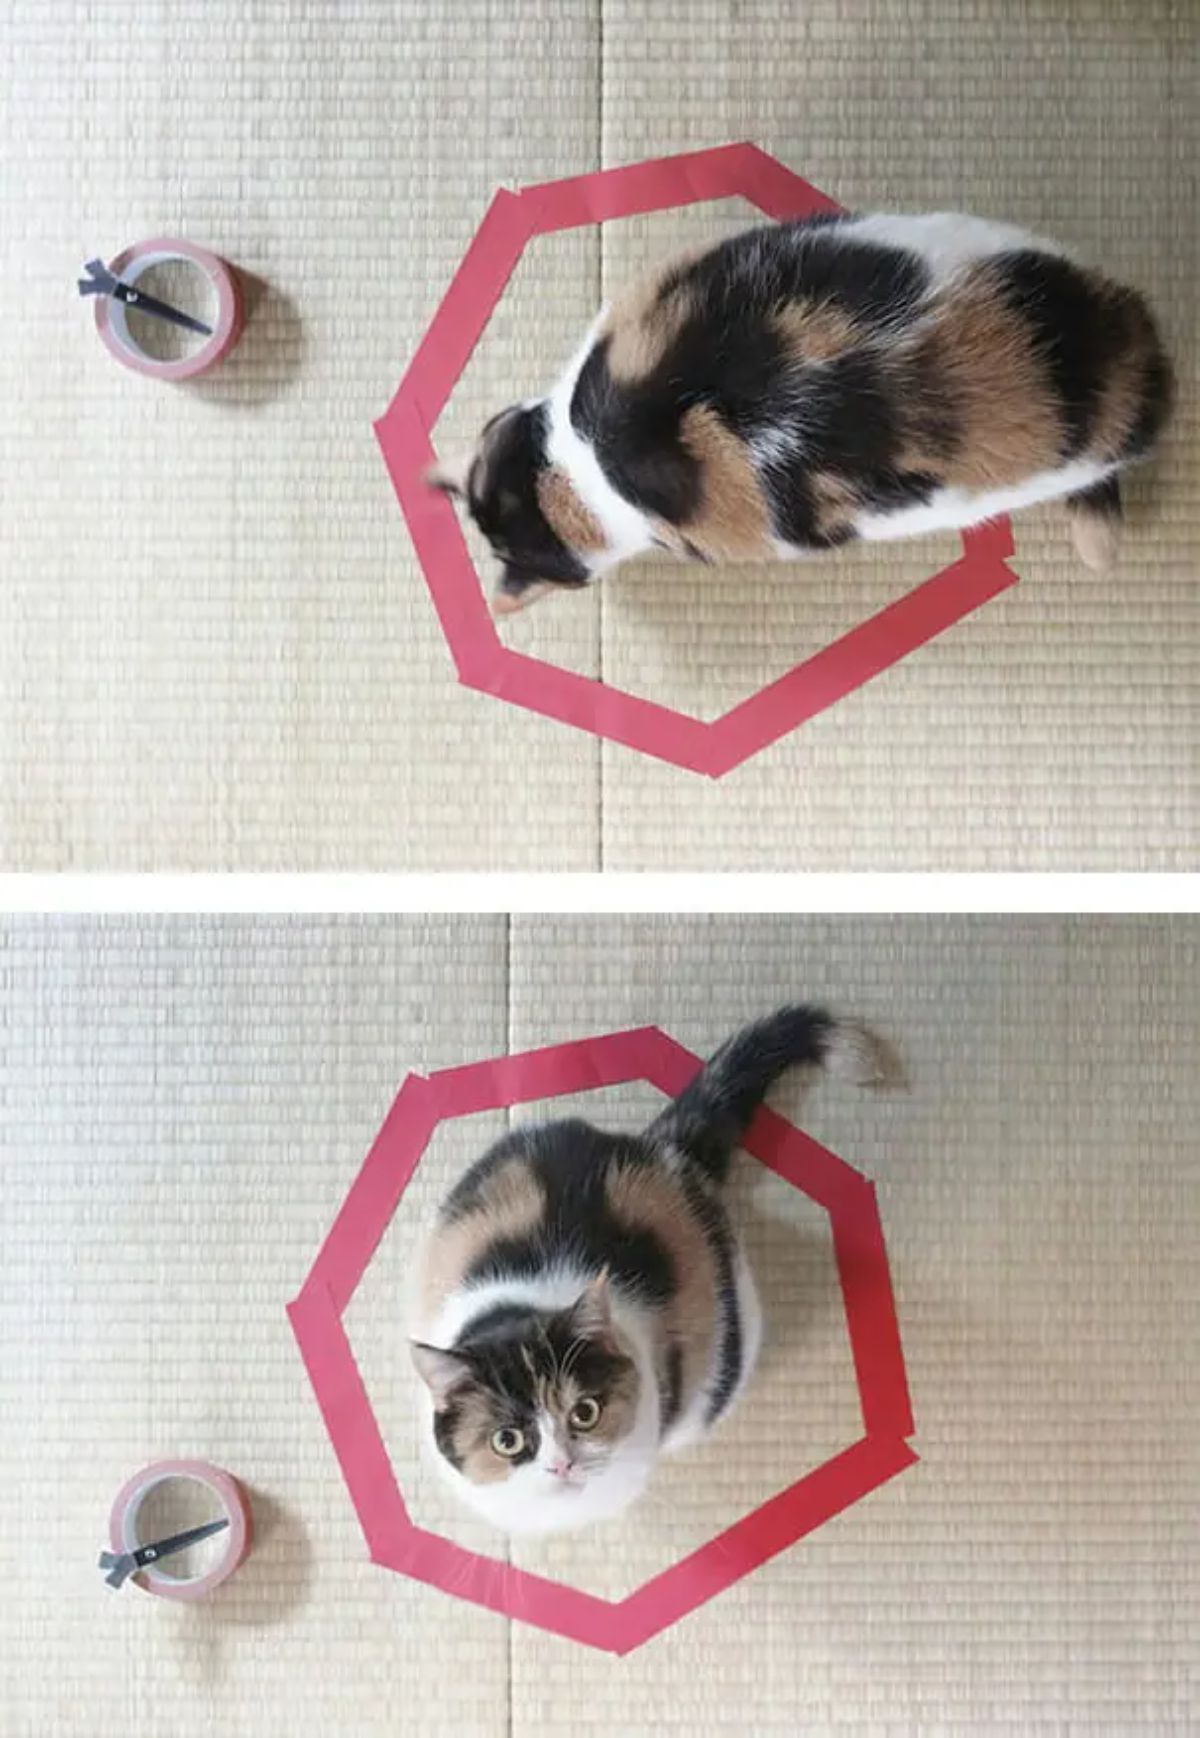 2 photos of a white orange and black cat sniffing and then sitting inside a septagon shape made on the floor with red tape